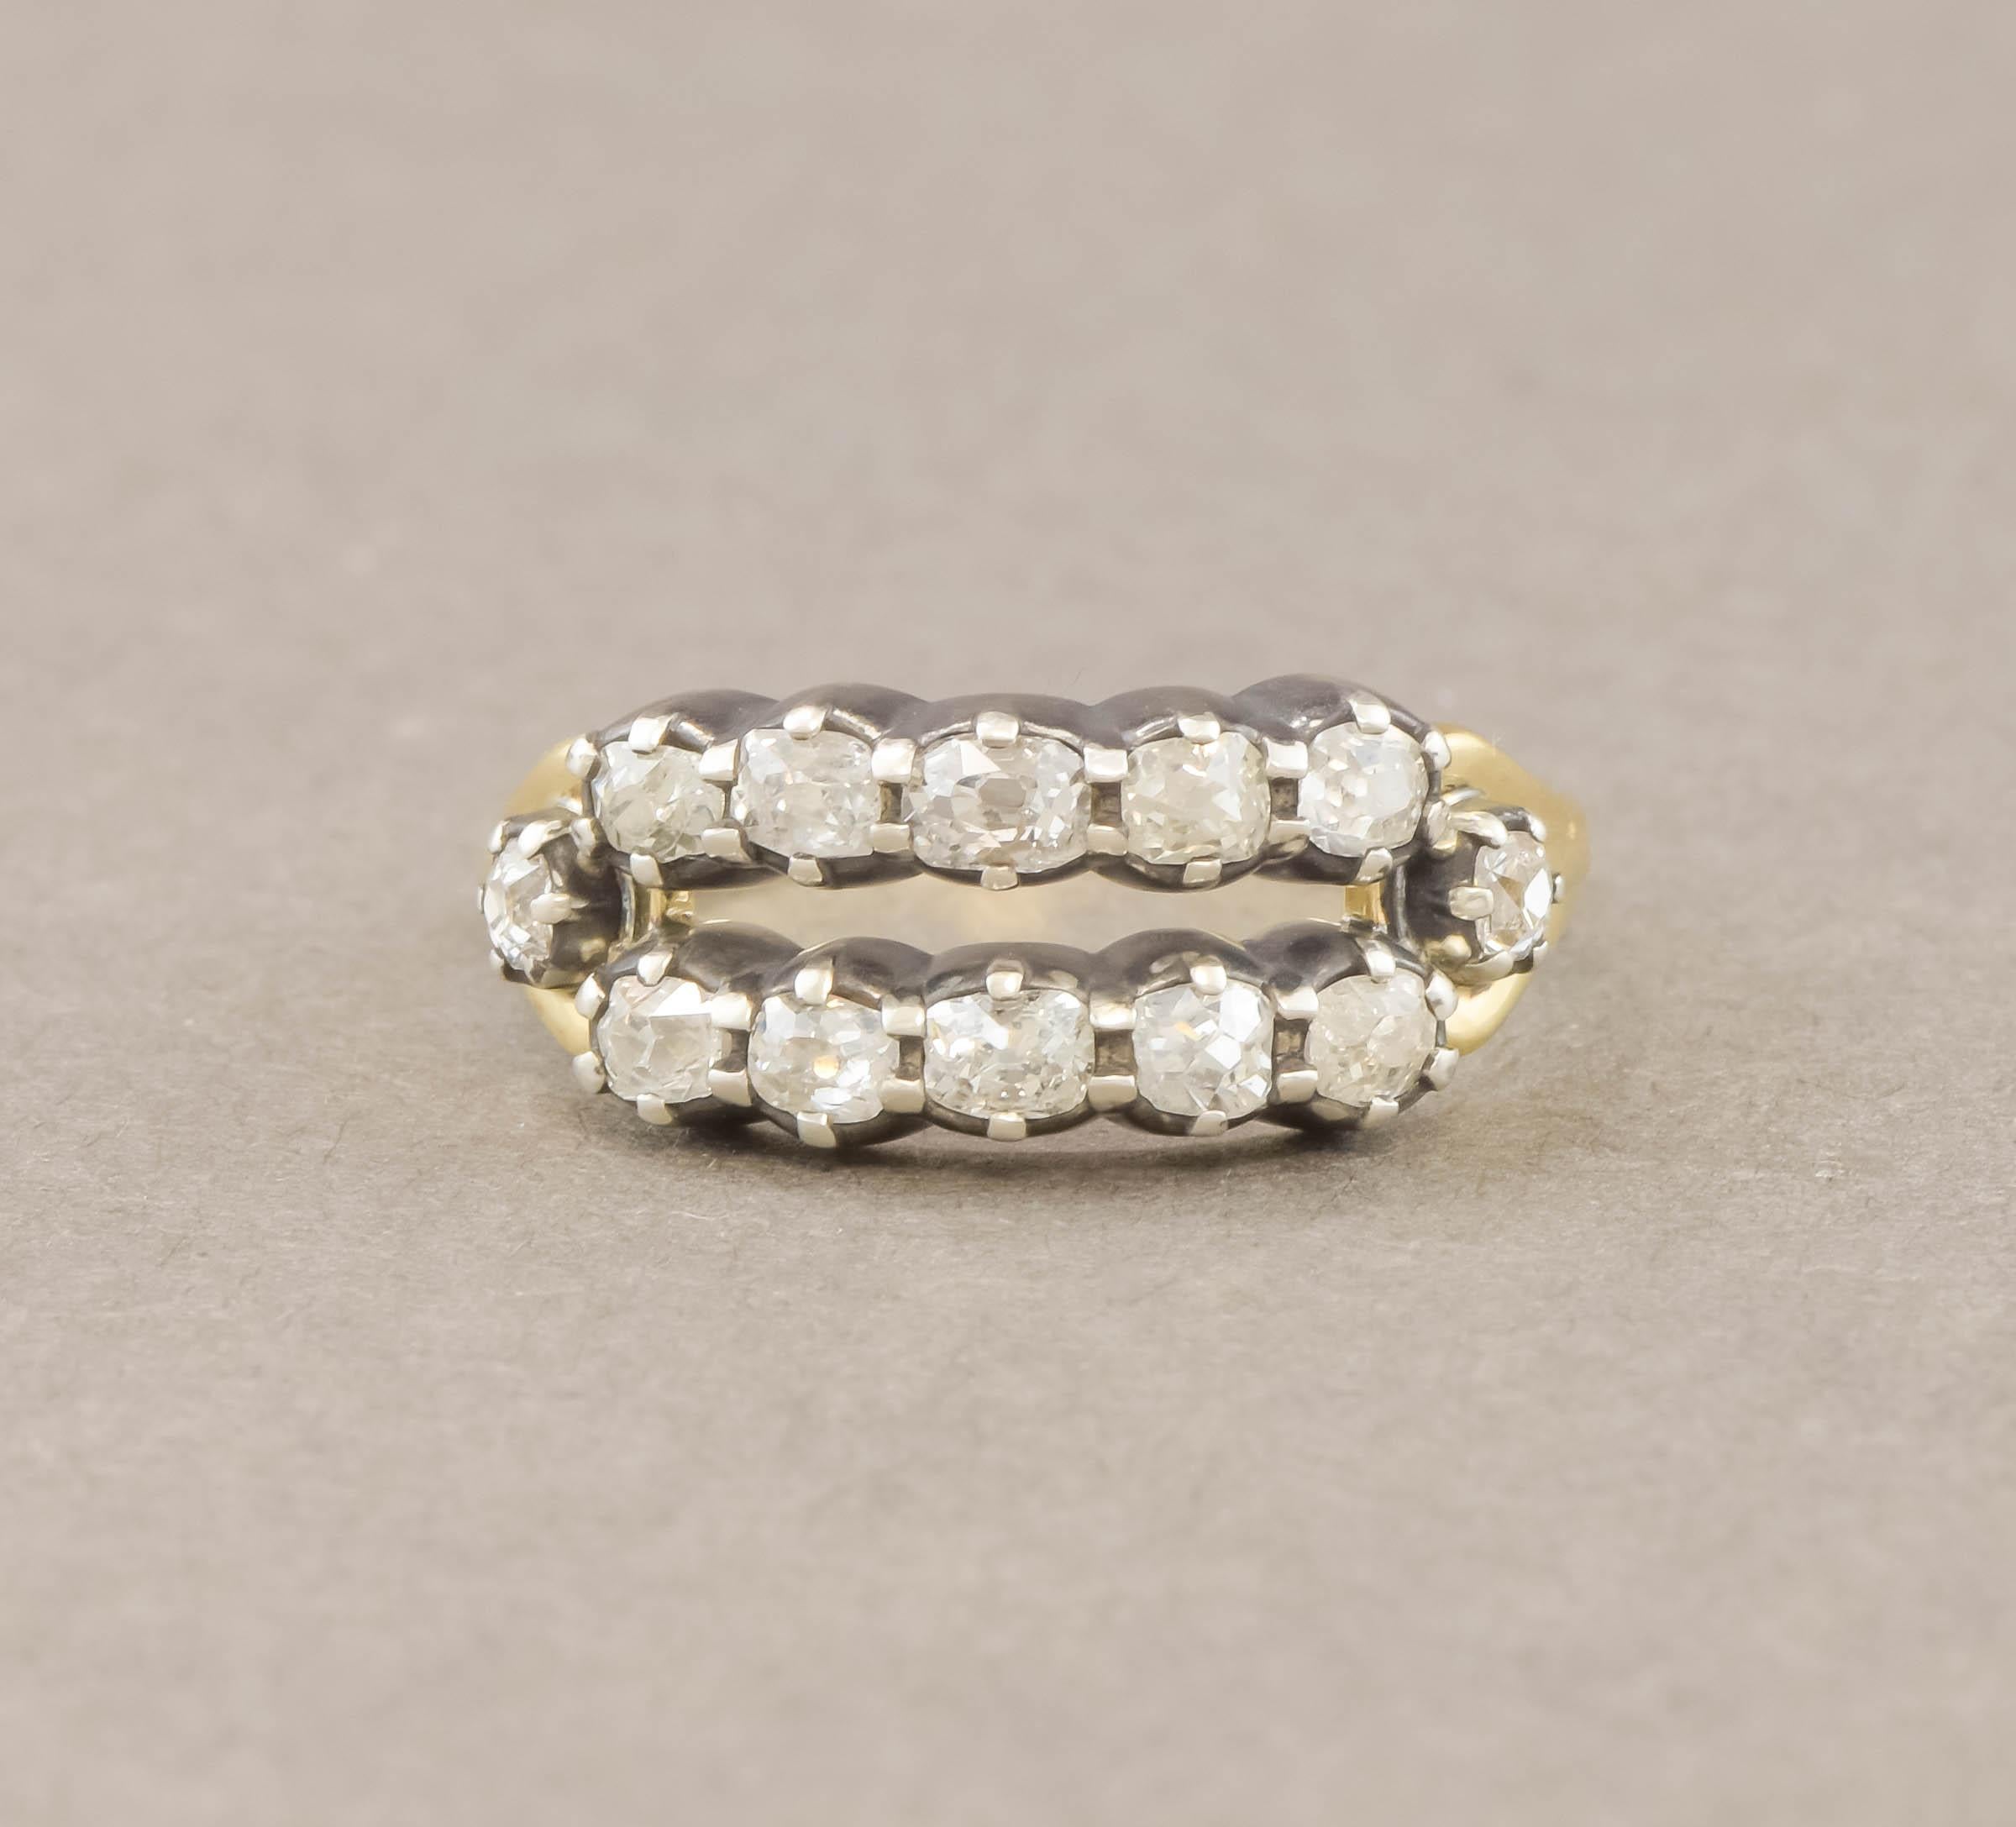 Double Row Ring with Antique Diamonds - Wedding, Anniversary or Stacking Band For Sale 2